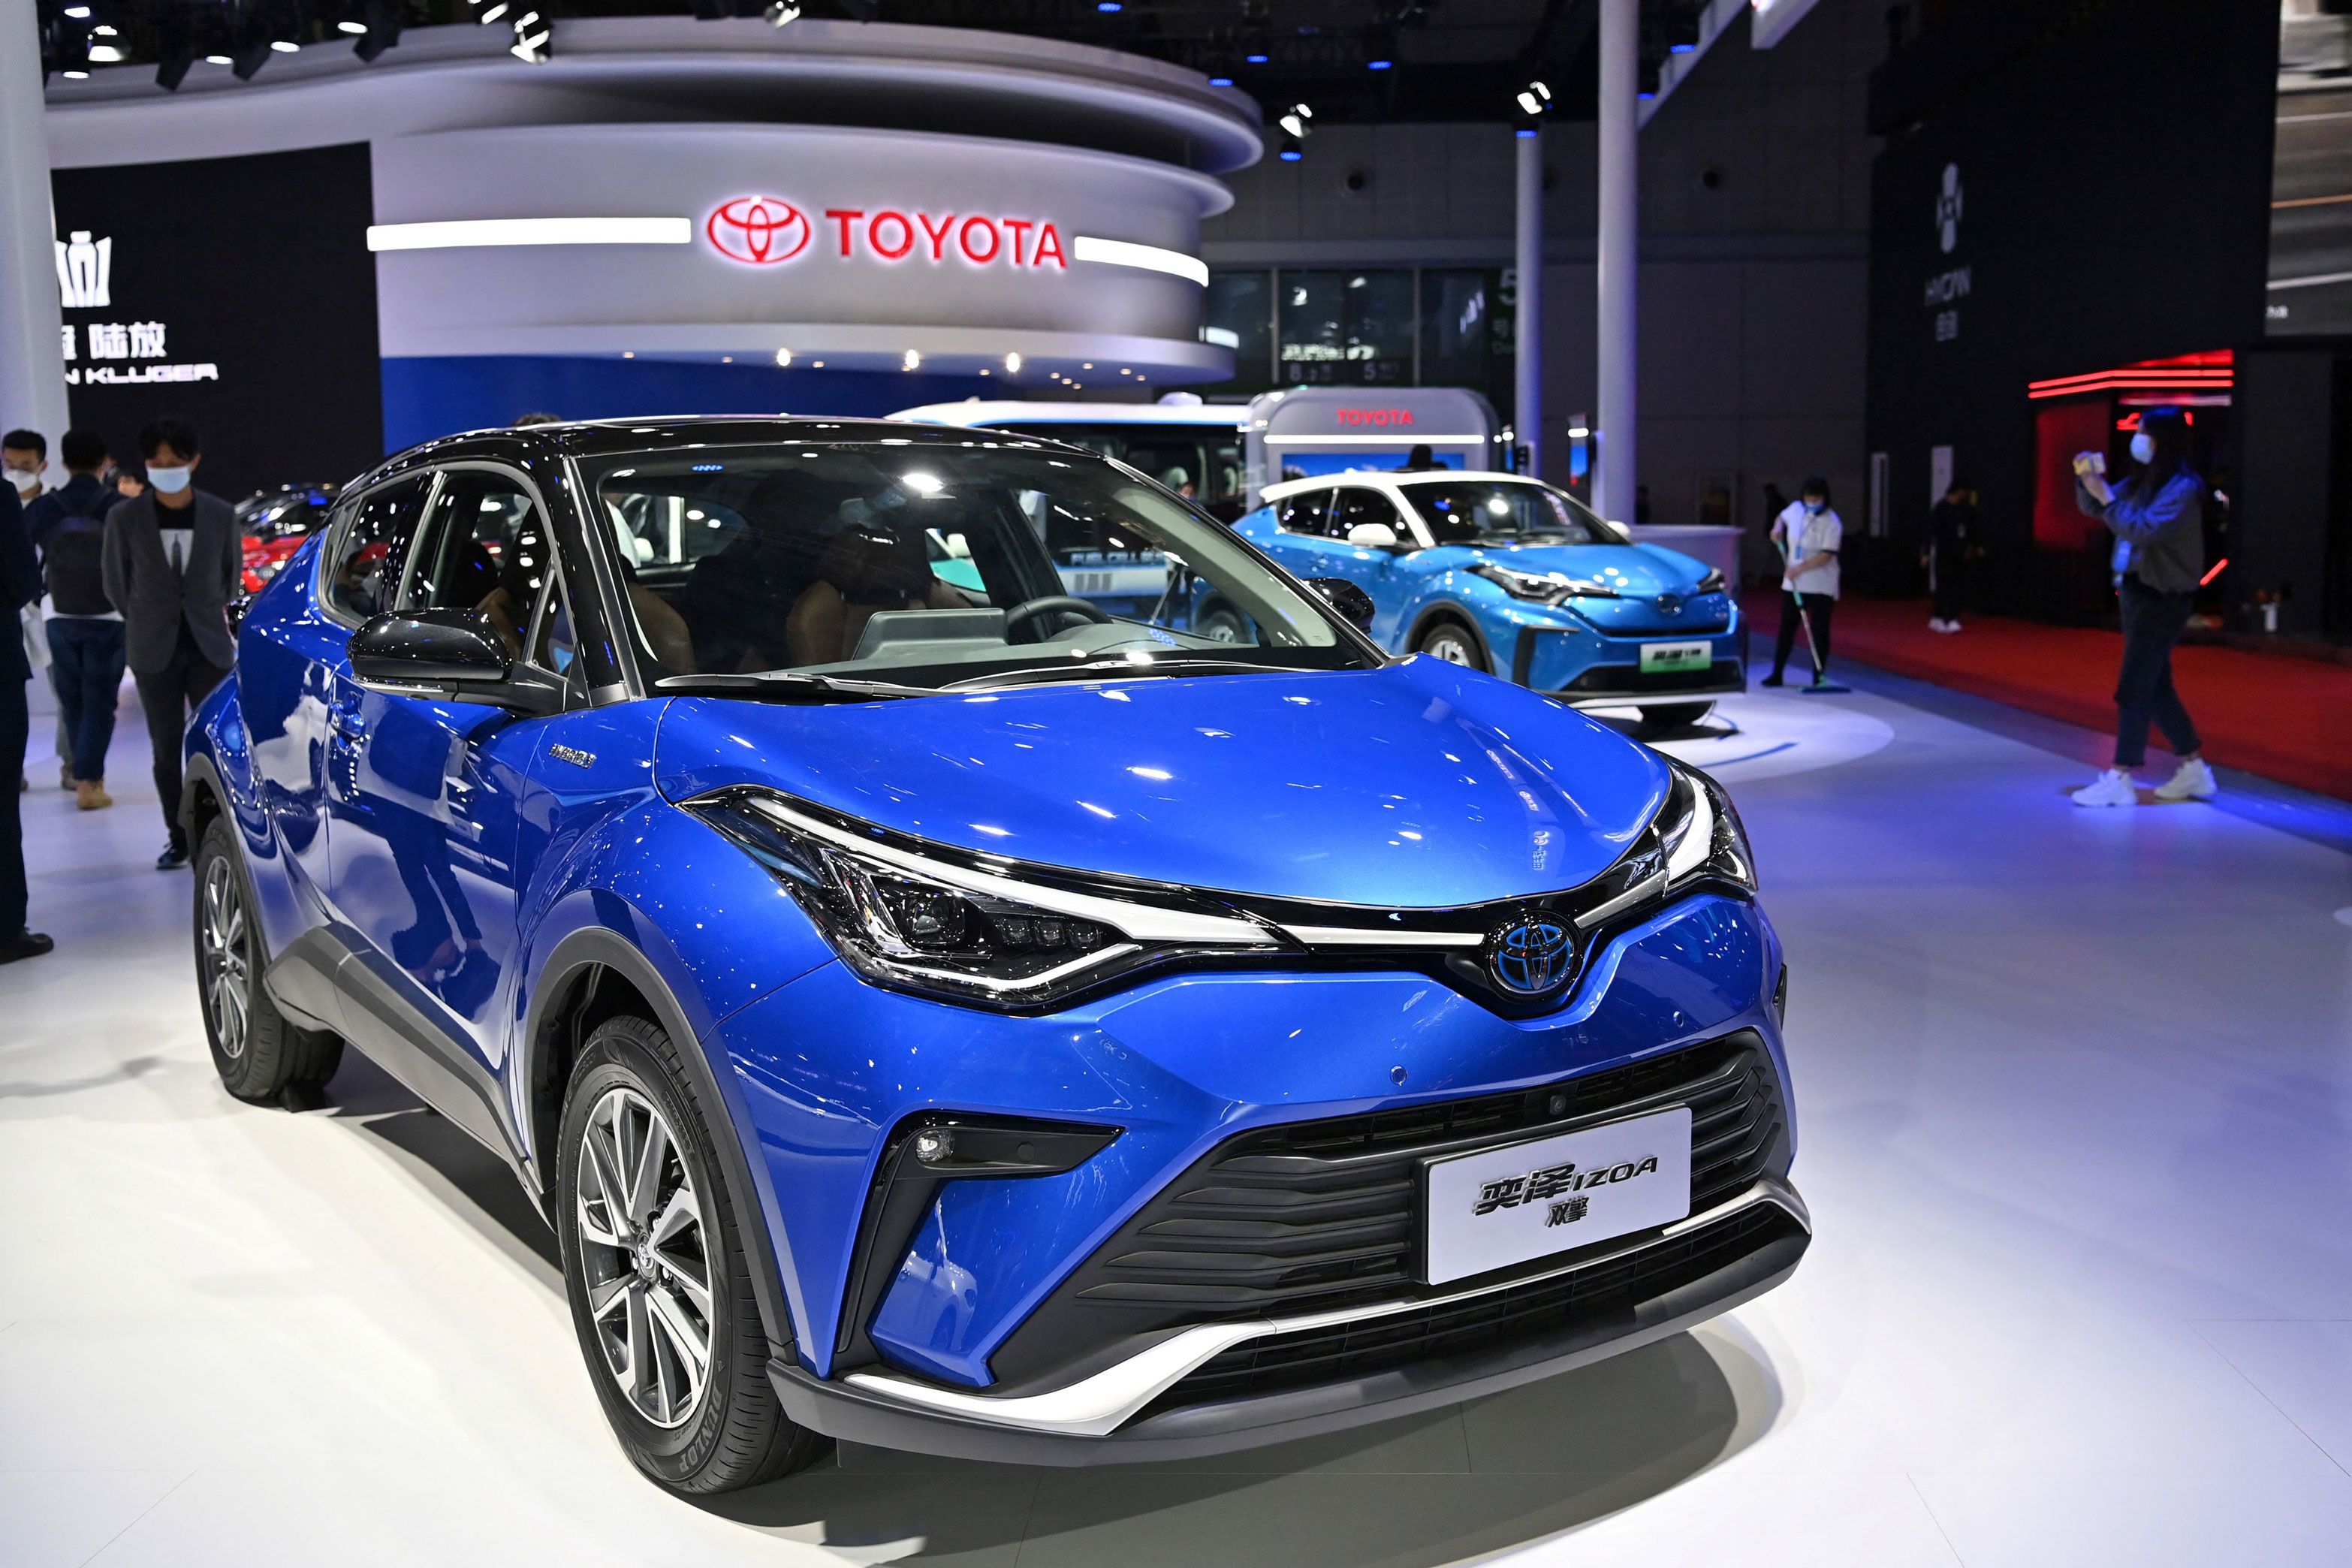 Toyota To Have Six Electric SUVs In Europe By 2026